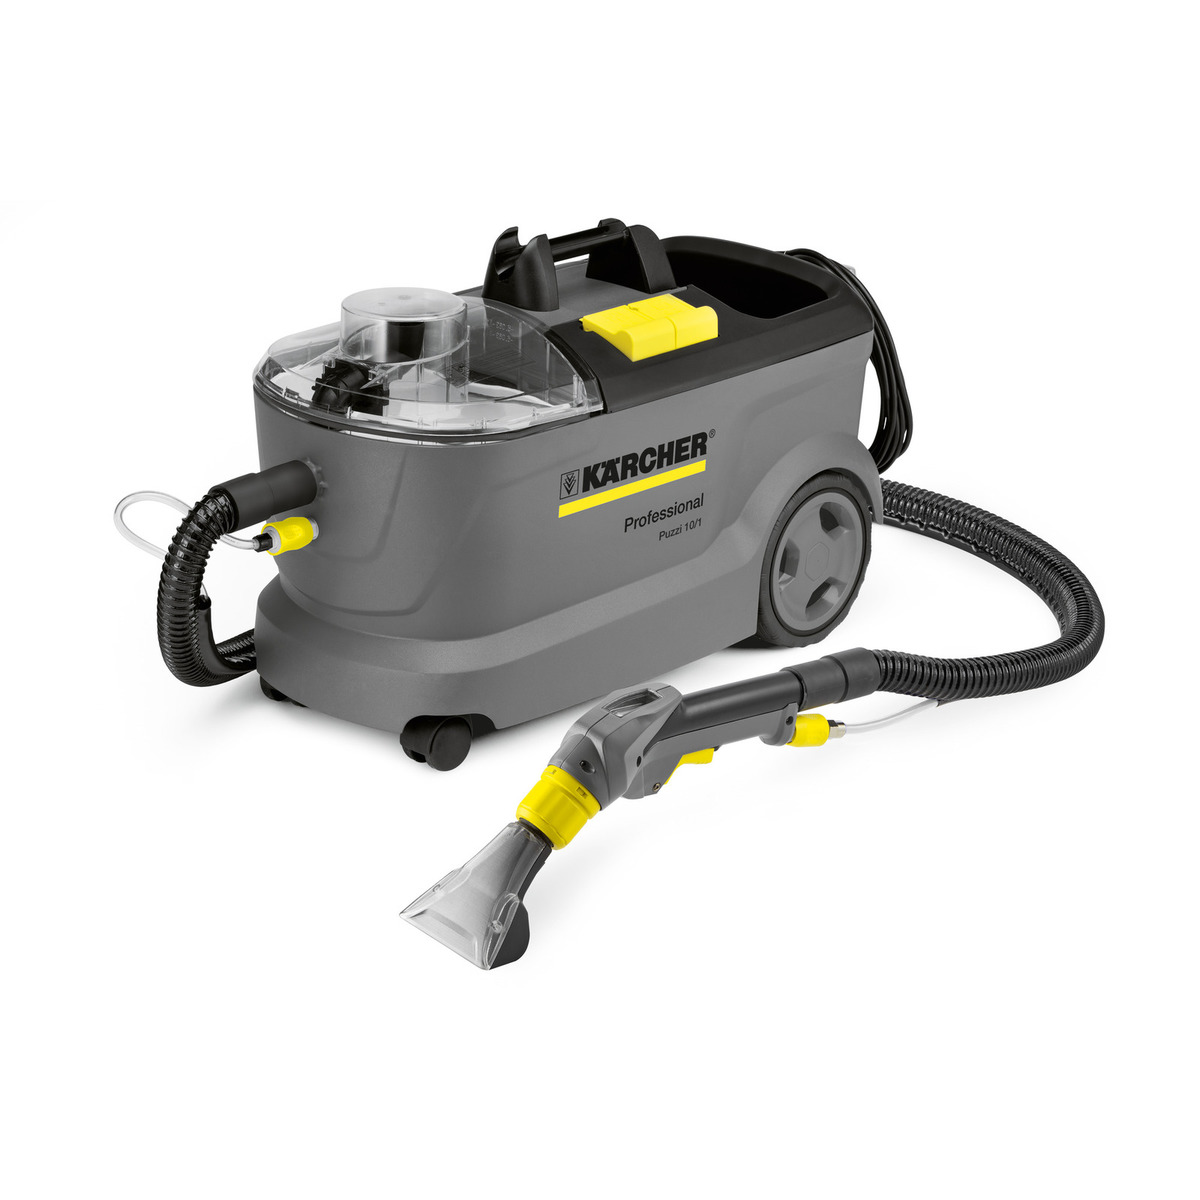 Karcher Spray-Extraction Cleaner Puzzi 10/1 + Hand